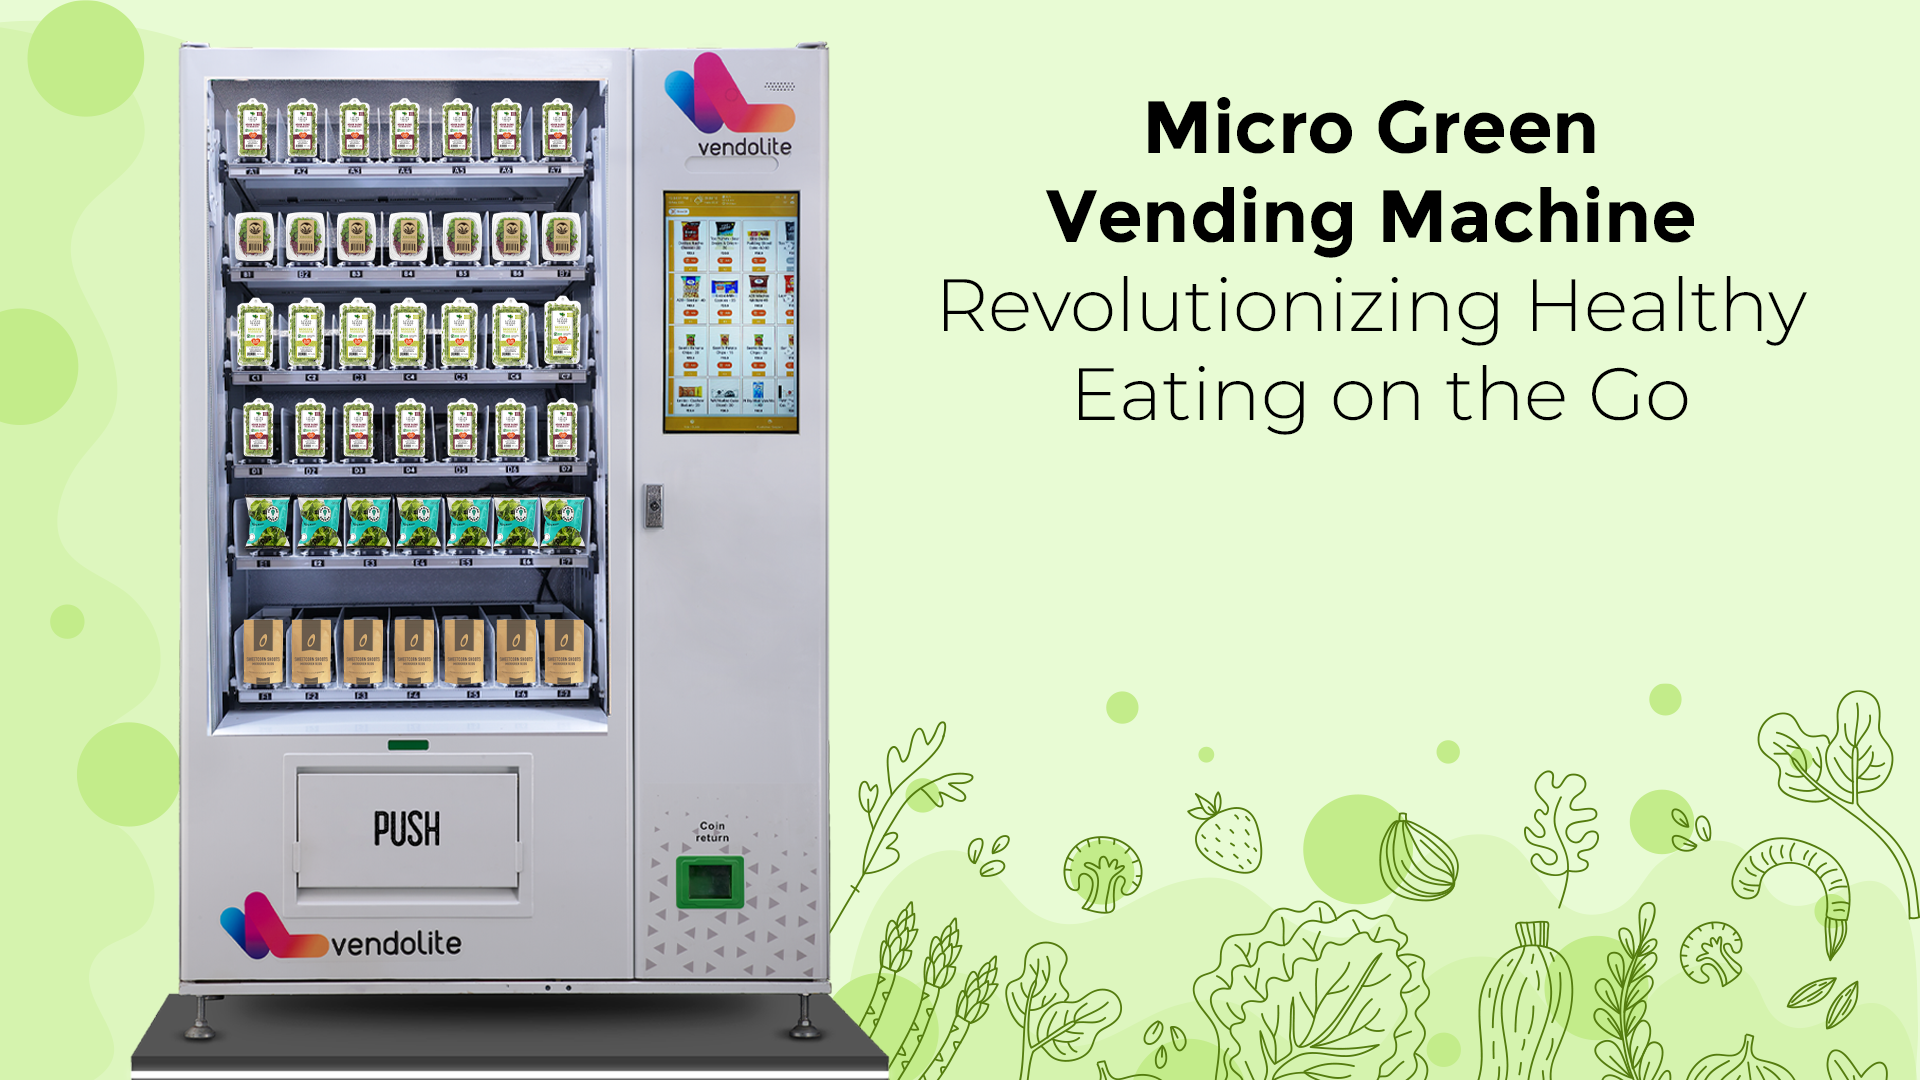 Micro Green Vending Machine: Revolutionizing Healthy Eating on the Go